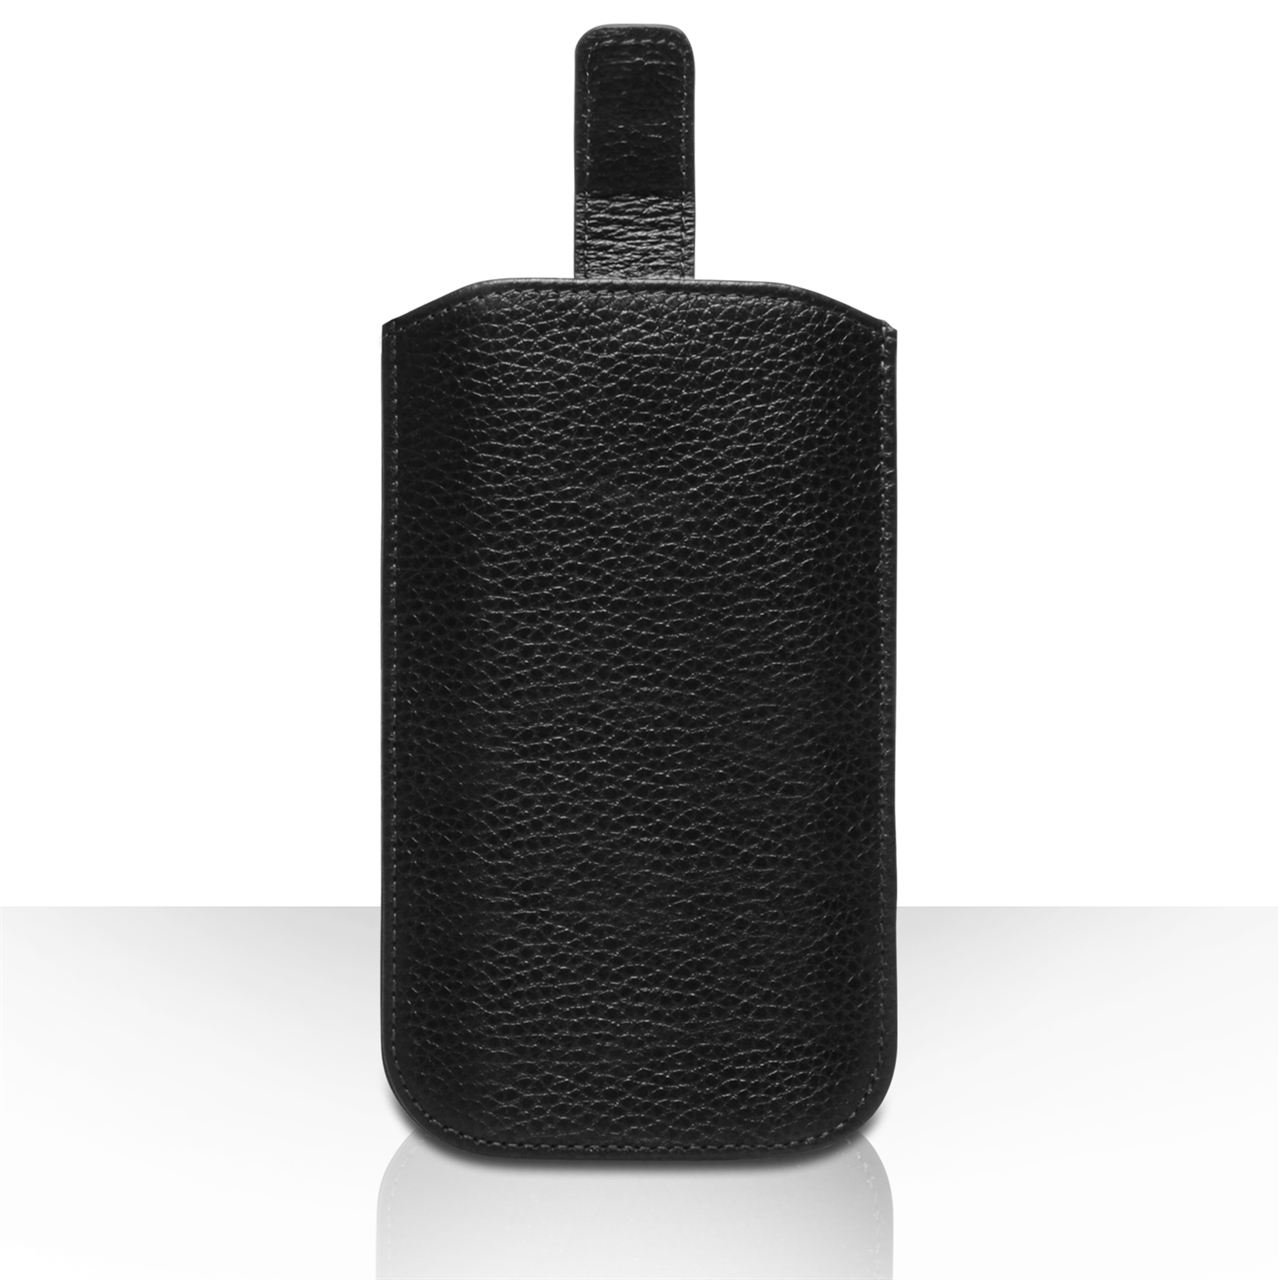 Caseflex Large Real Leather Return Phone Pouch - Black